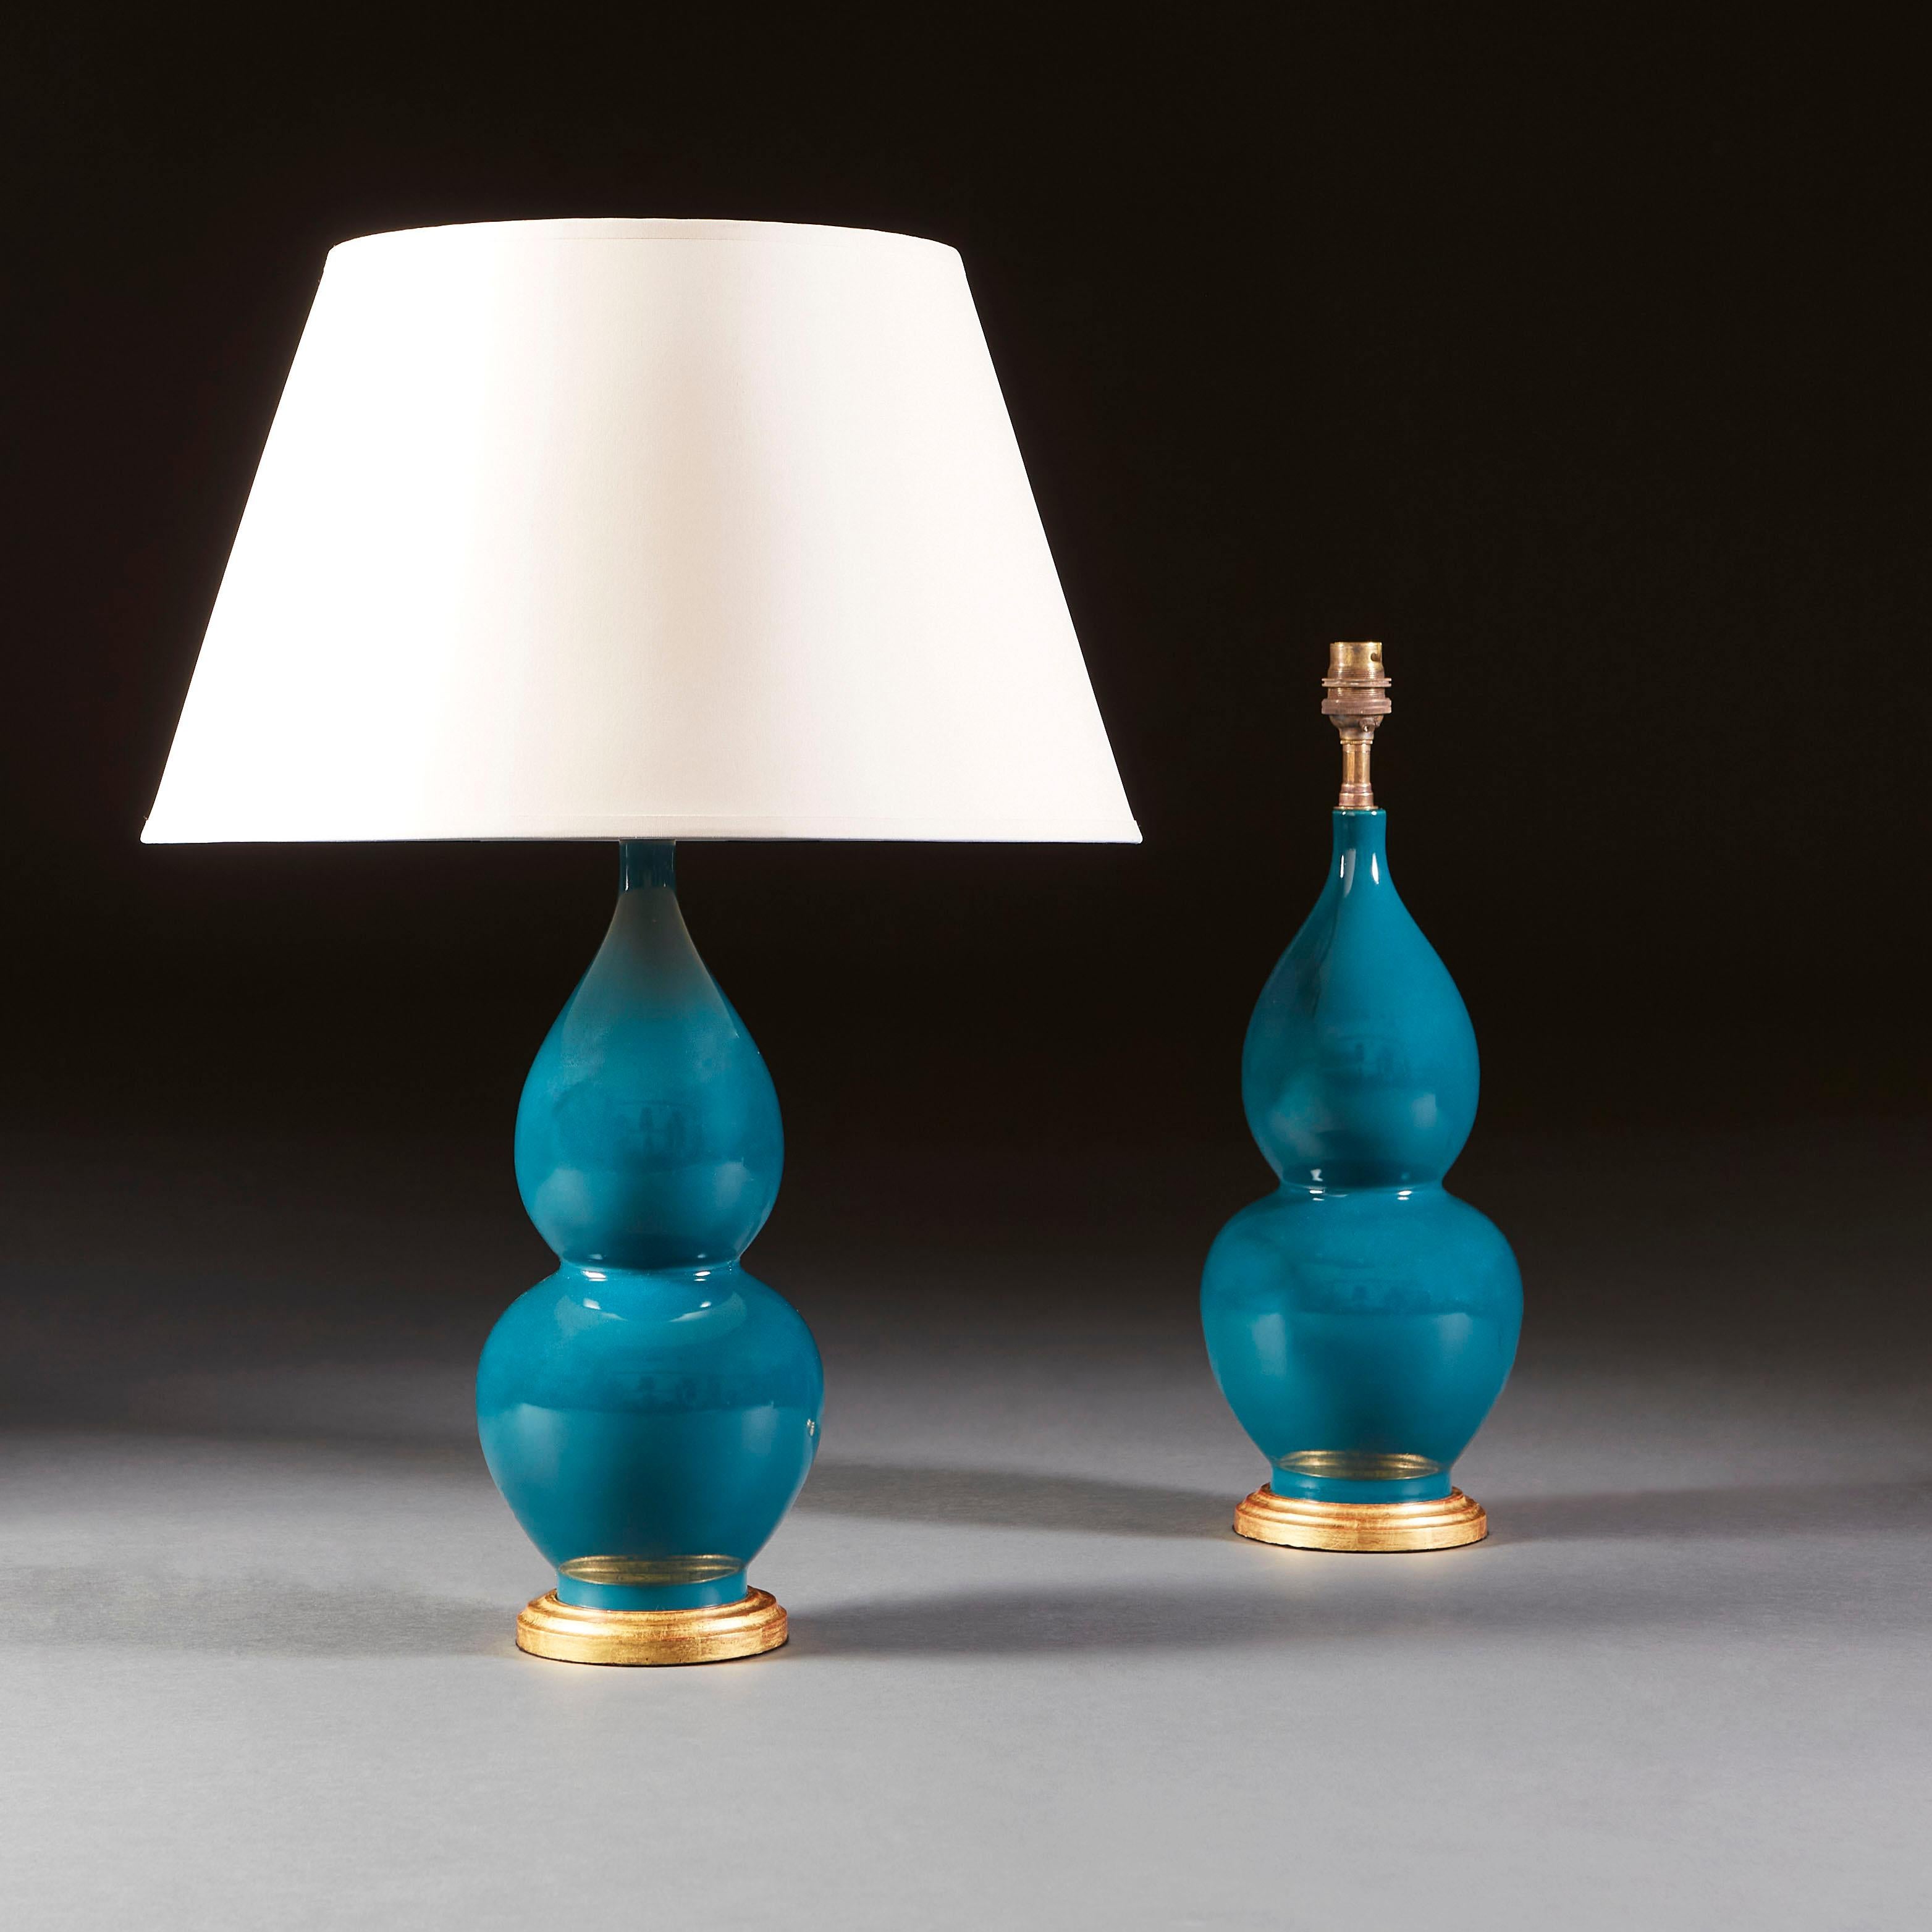 A fine pair of early twentieth century turquoise Chinese vases of double gourd form, now converted as lamps with turned giltwood bases.

Currently wired for the UK.

Please note: lampshades not included.